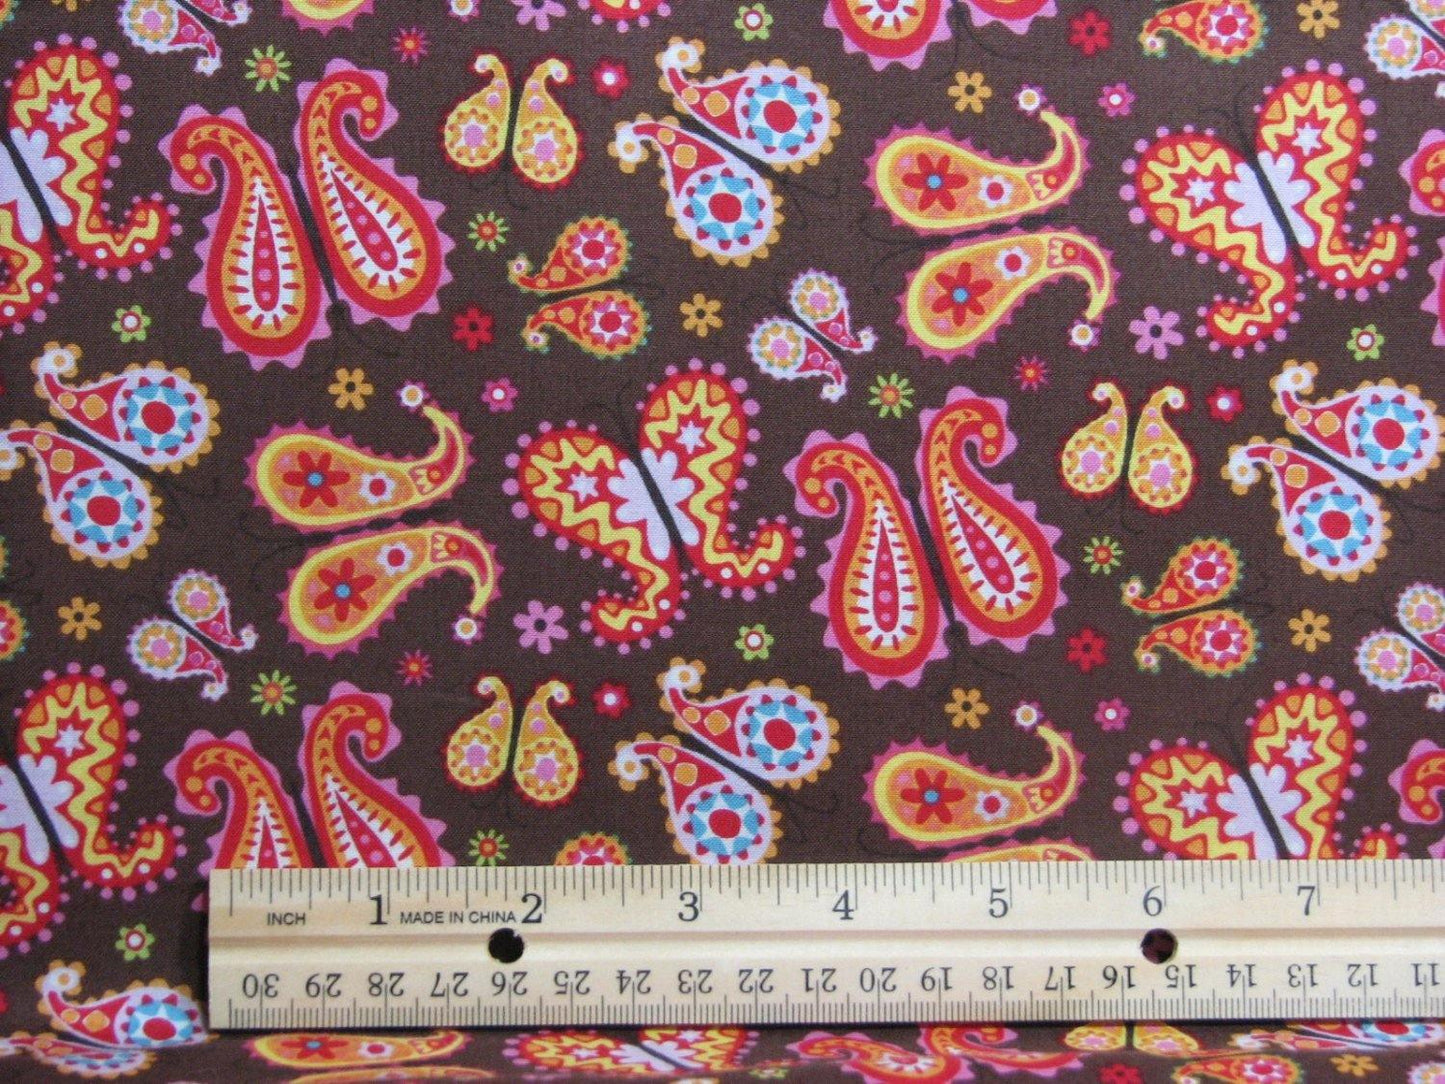 In The Beginning Fabrics Phoebe 2WSC-2 Butterfly Cotton Fabric by the Yard - In The Beginnning Fabrics - sewmuchonline